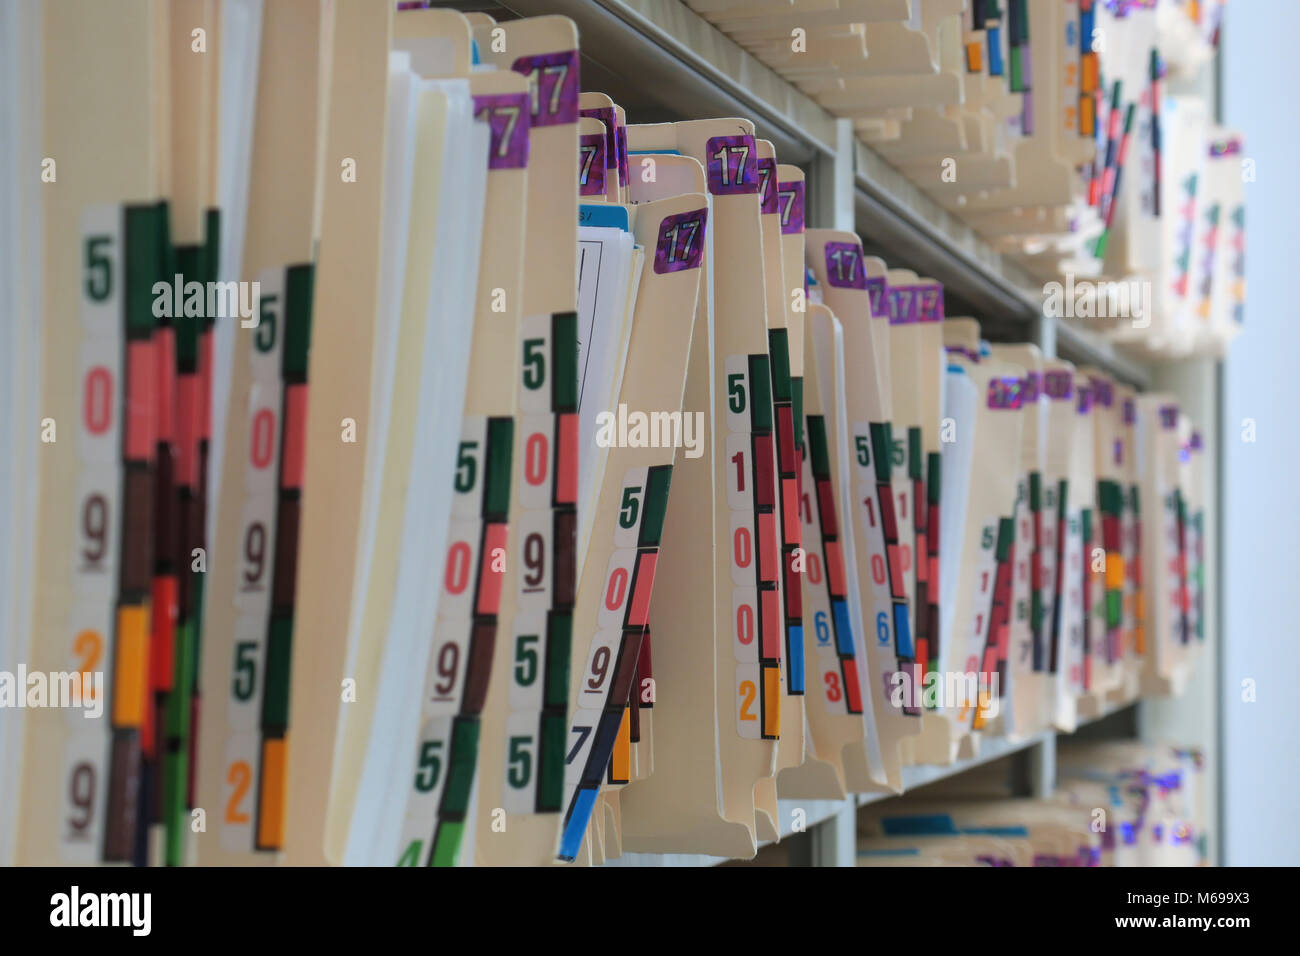 Medical records stored on a shelf Stock Photo